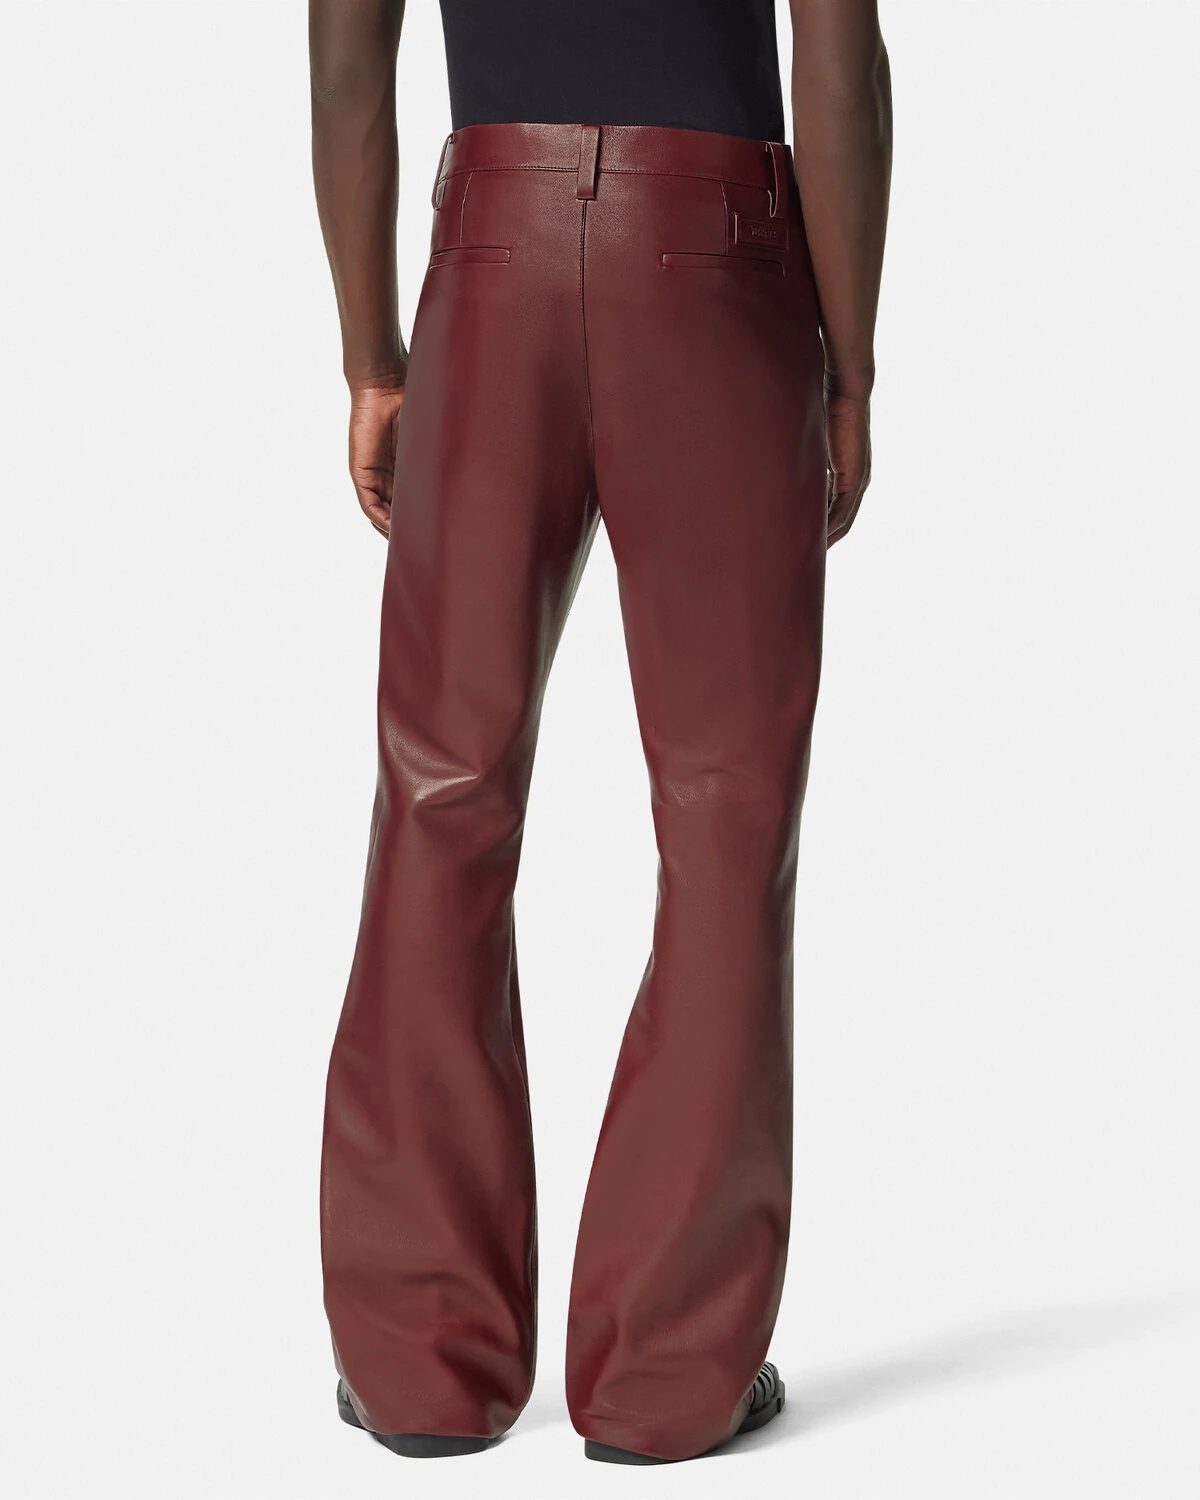 Flared Leather Pants - 5